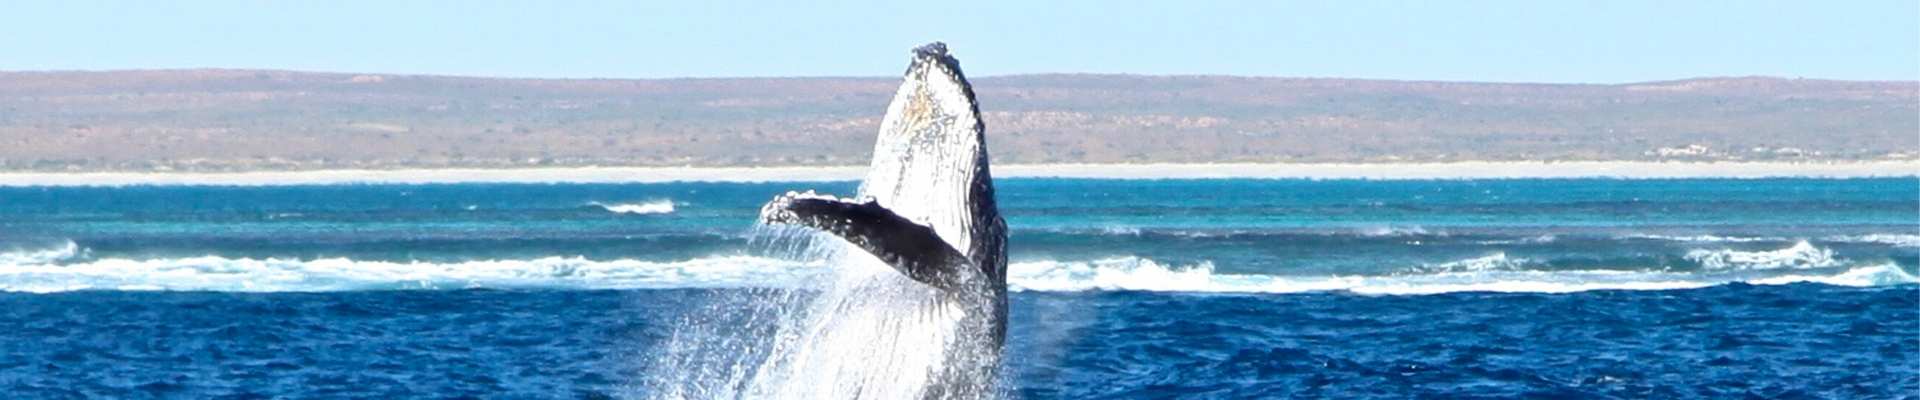 Winter Whale watching Image